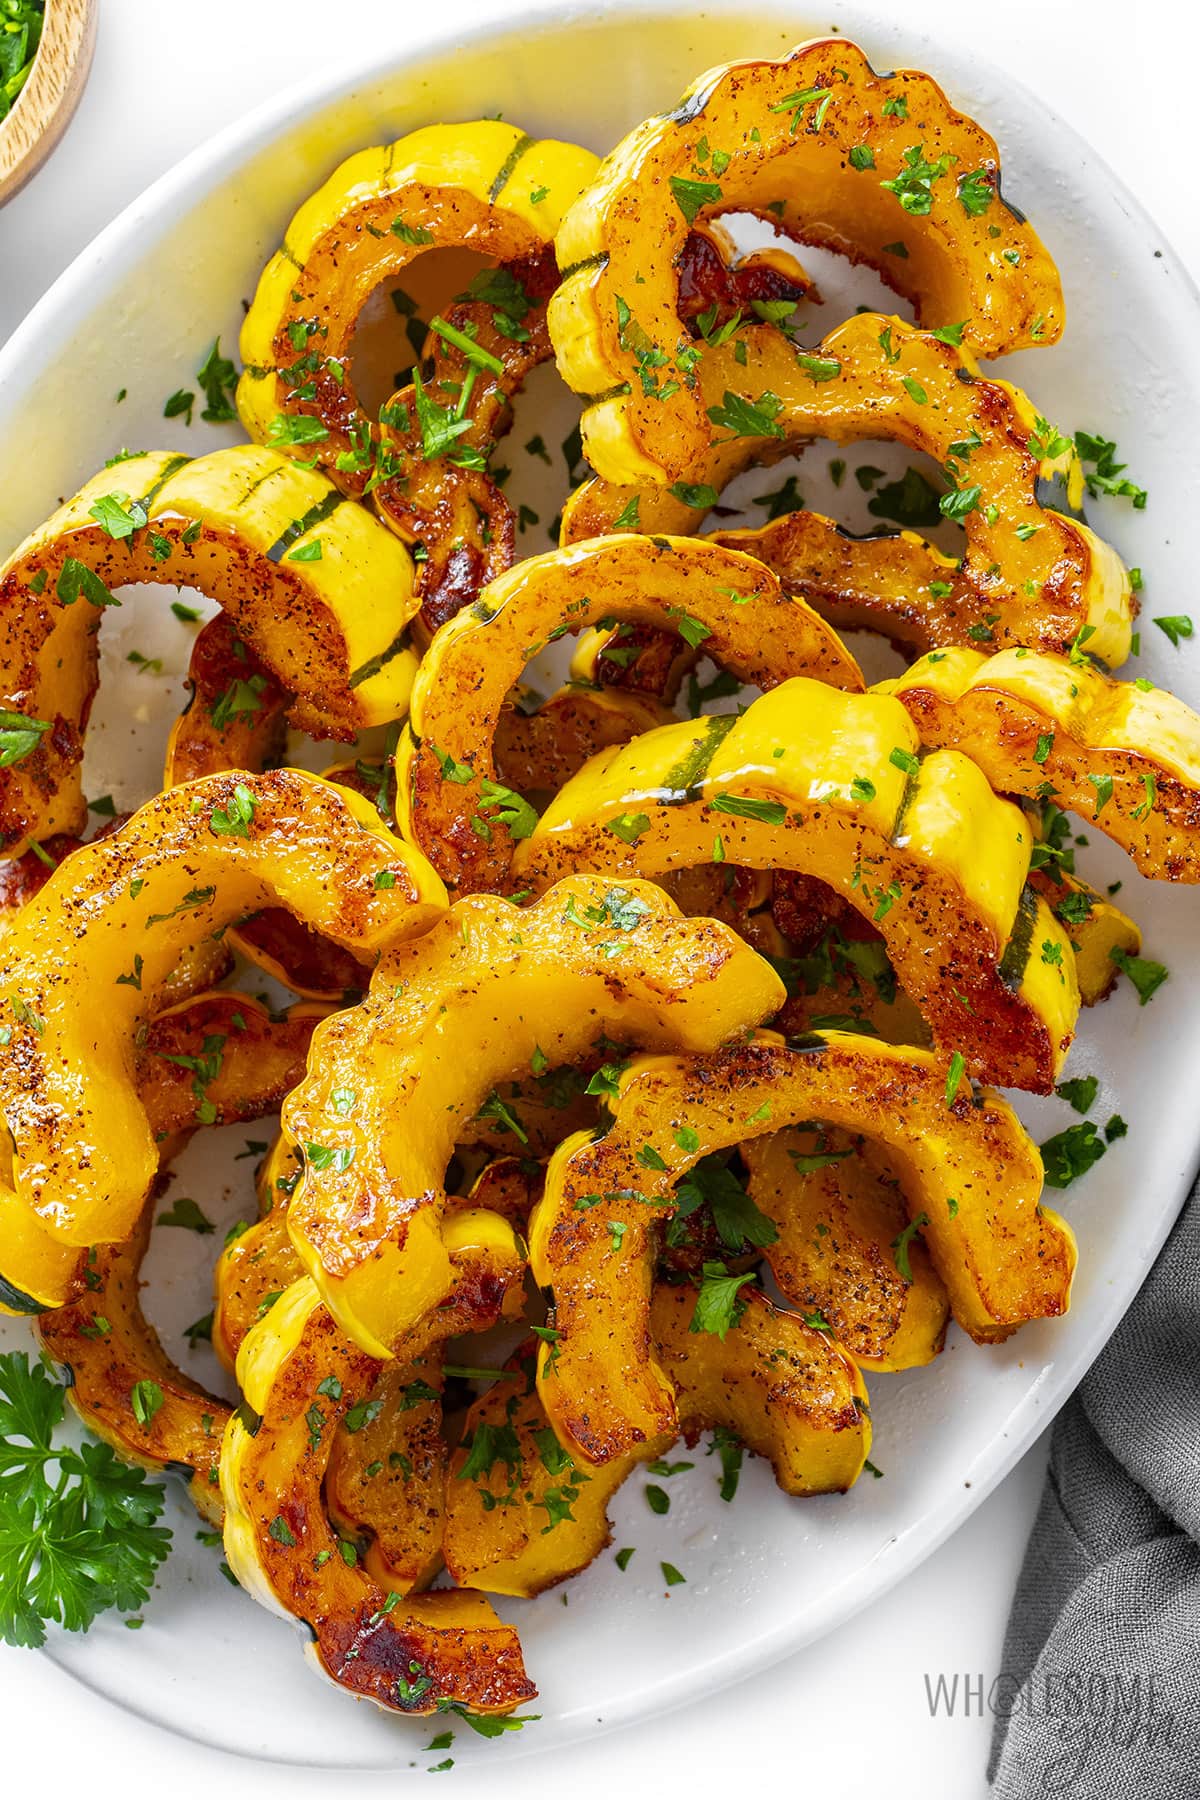 Roasted delicata squash on a plate.